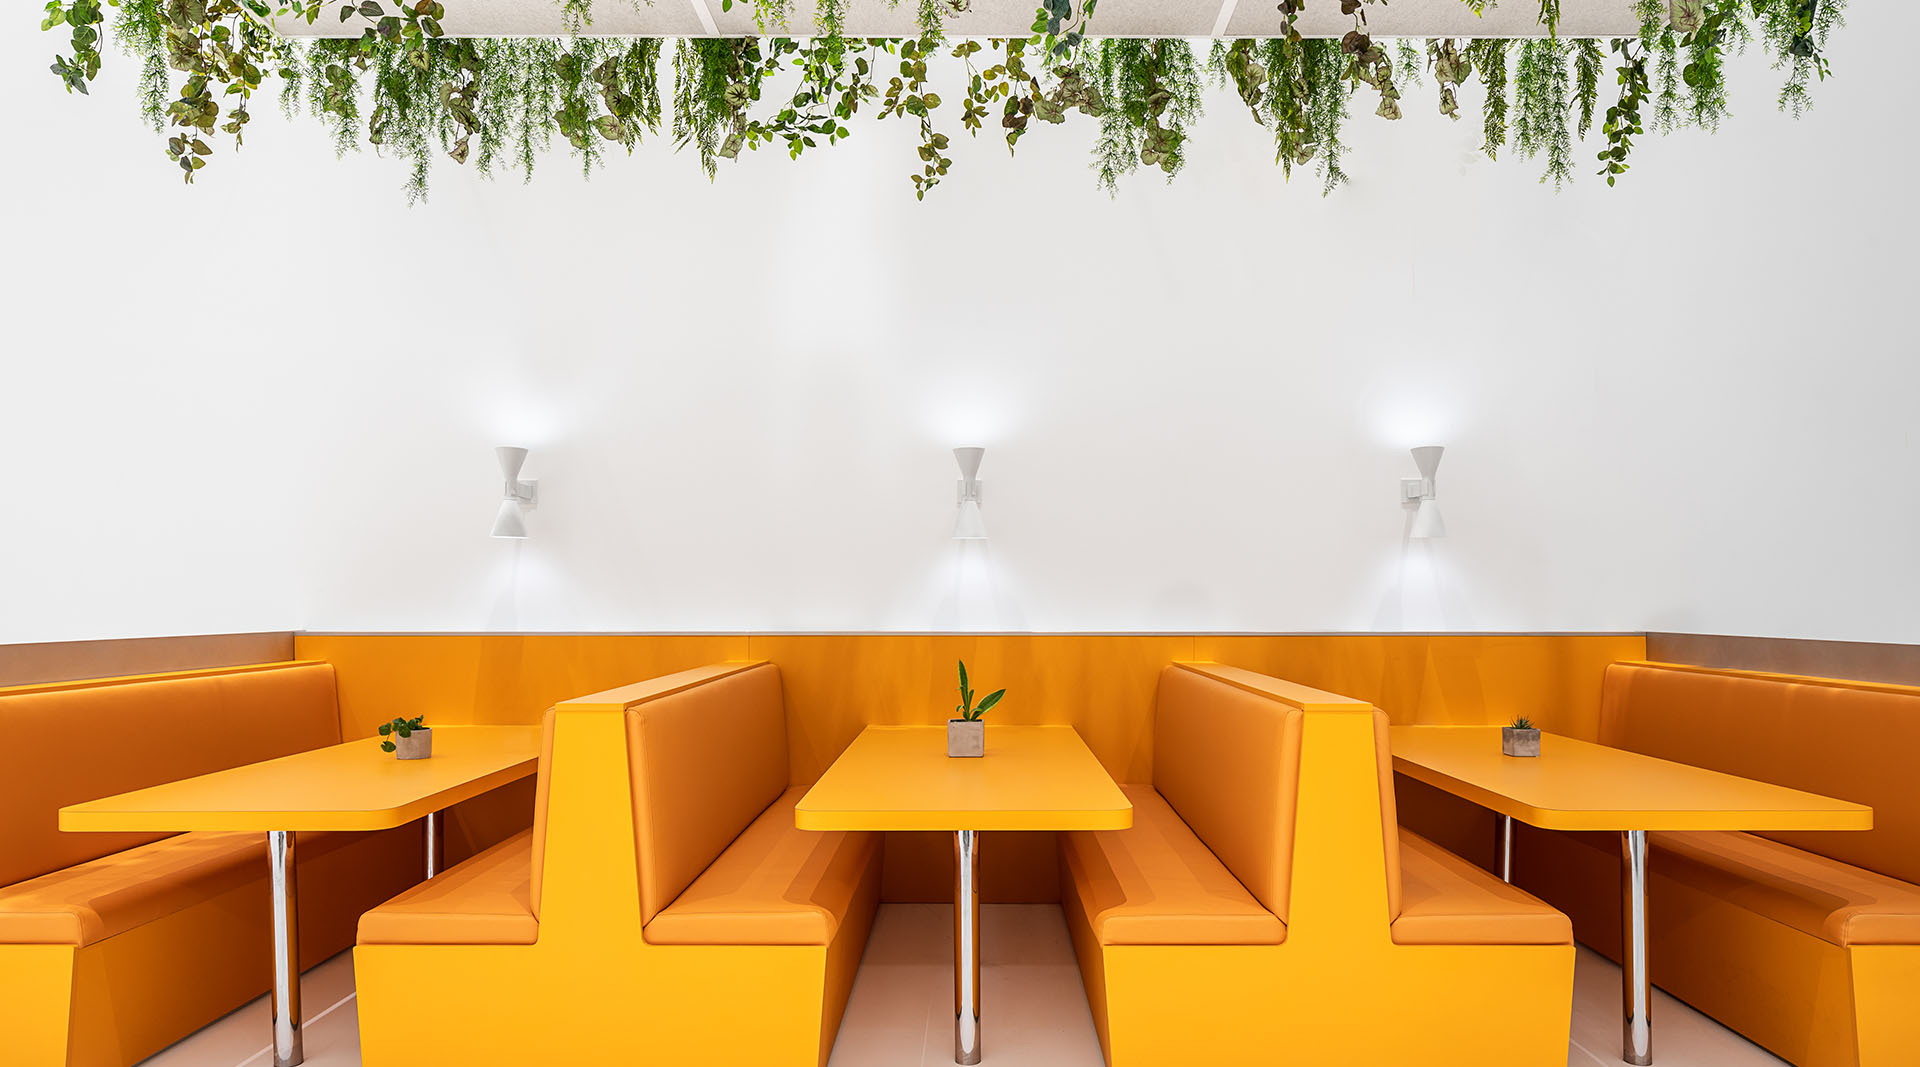 Corporate cafeteria design at Keirton headquarters in Surrey BC, with bright orange seating, white walls, and overhanging plants